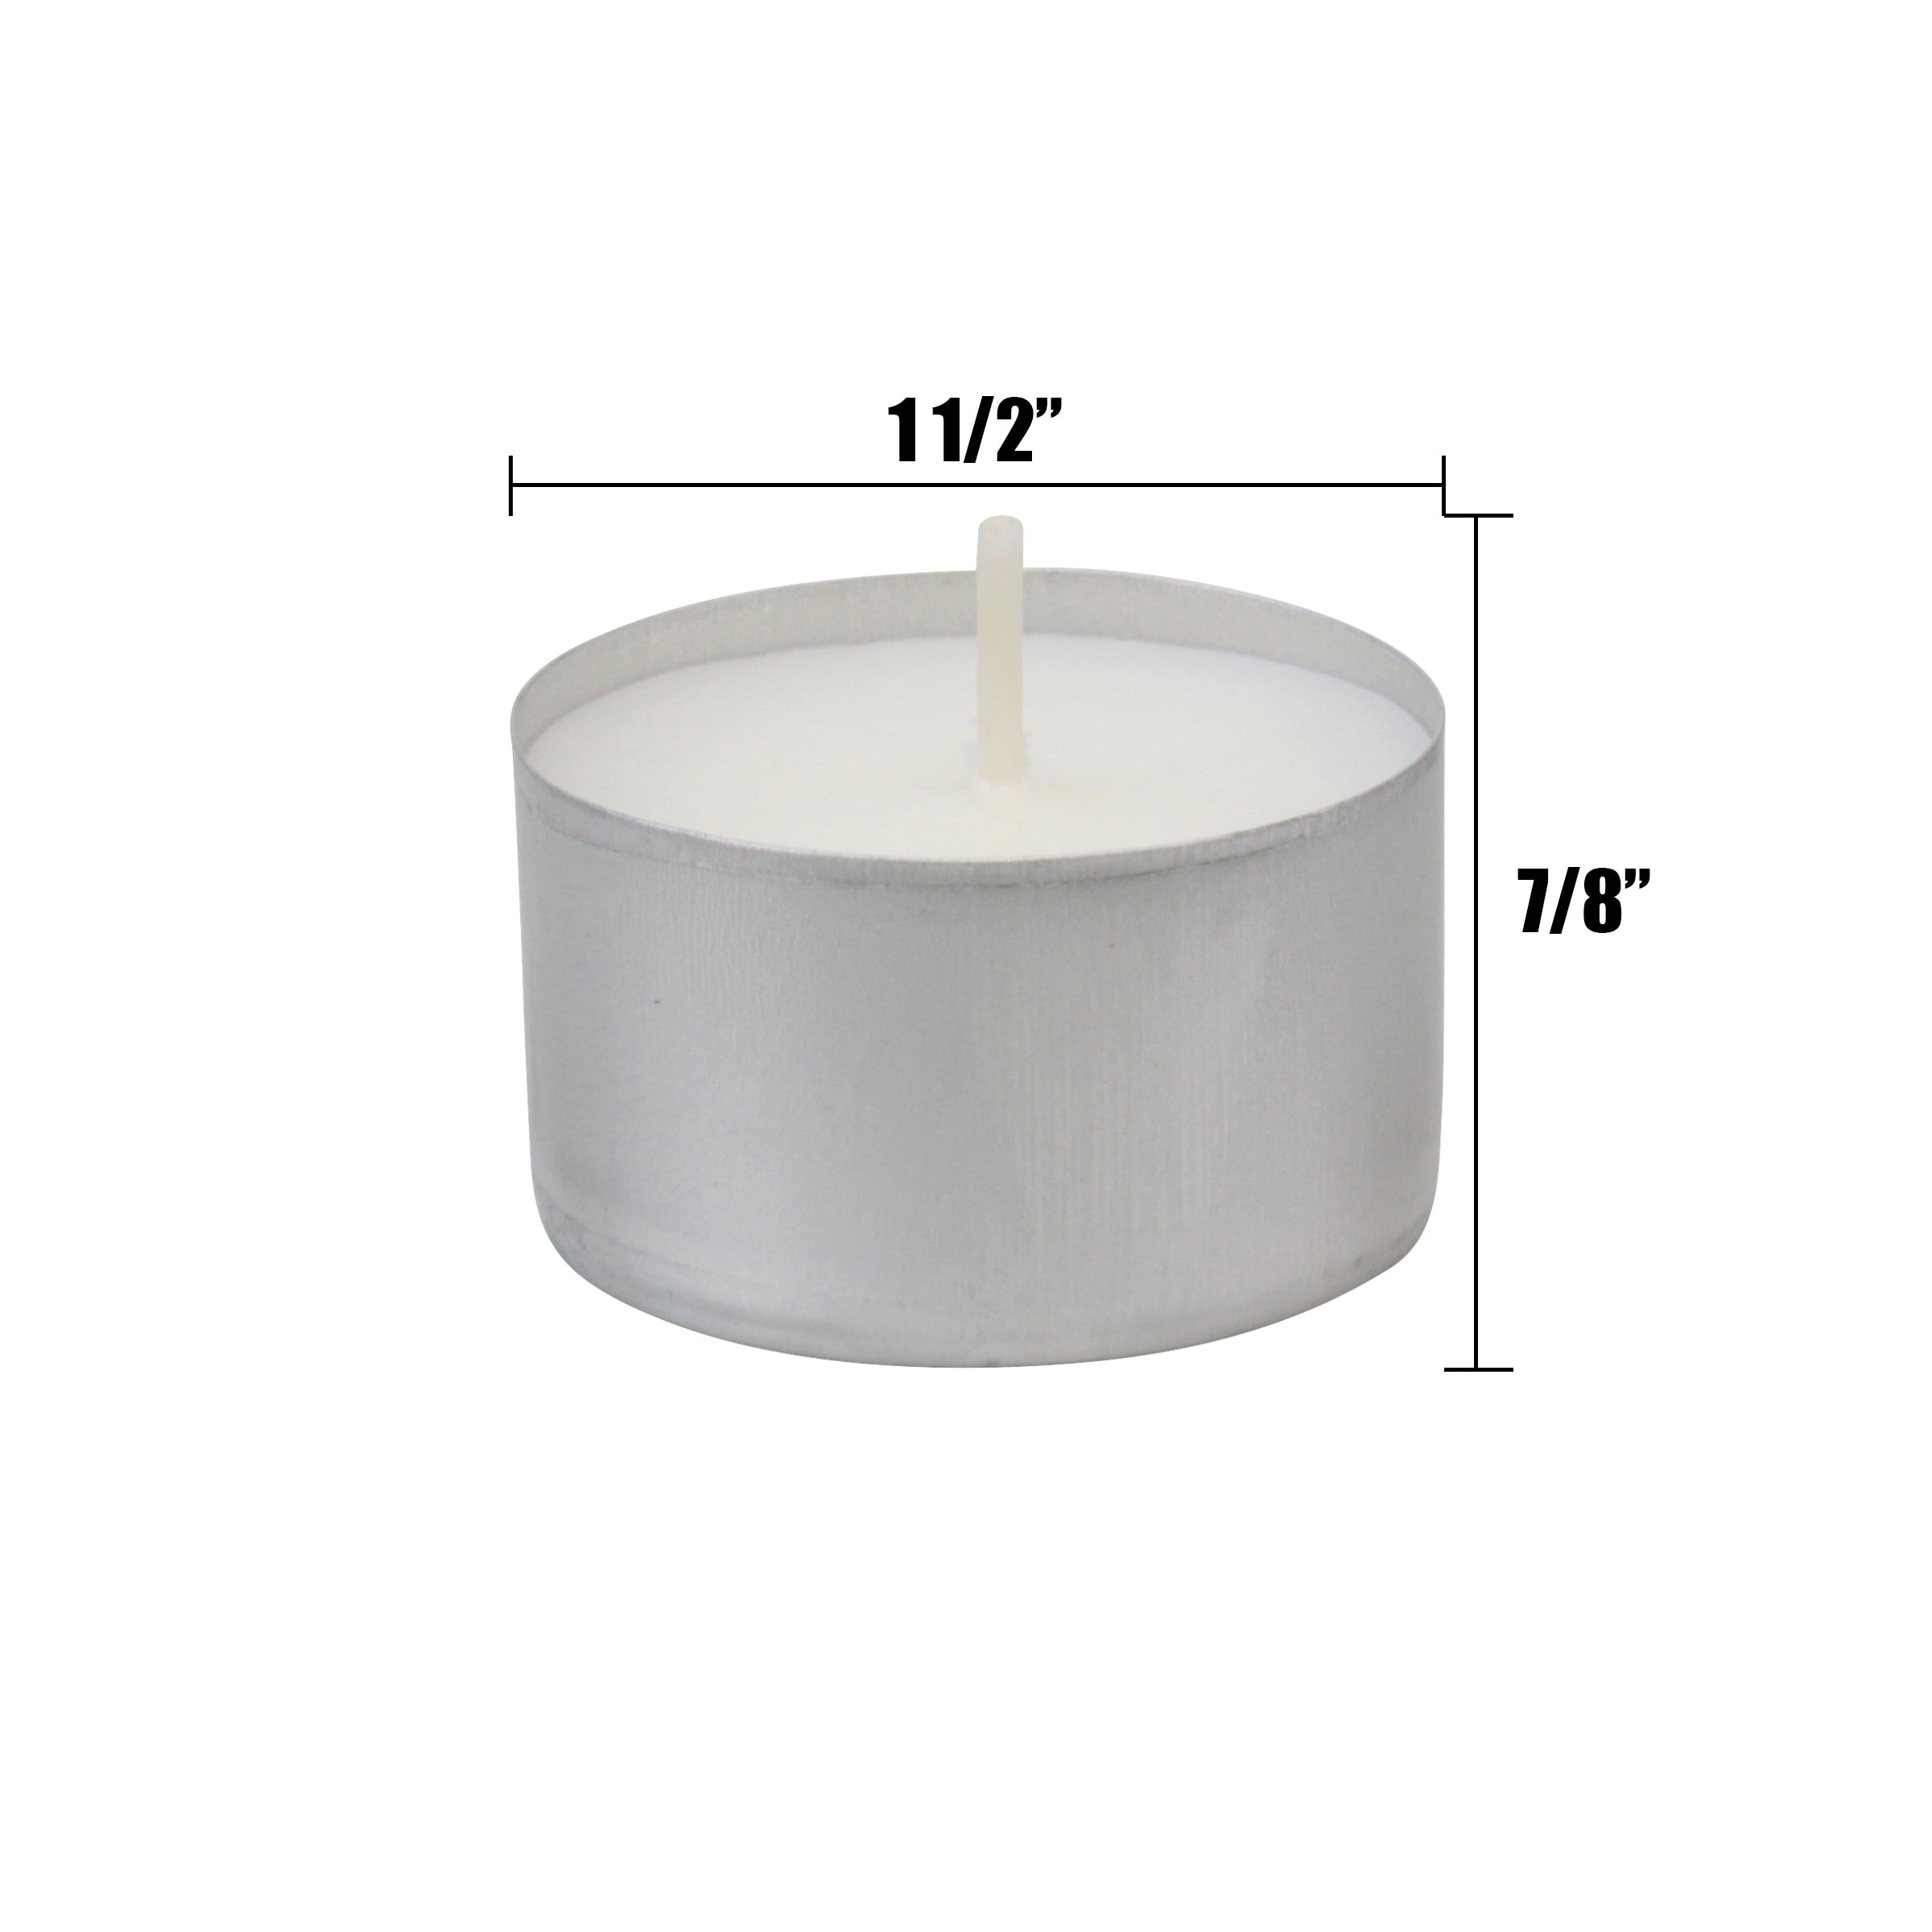 D'light Online Extended Burn 7 Hour Long Burn Unscented White Tealight Candles in Aluminum Cups - Set of 400